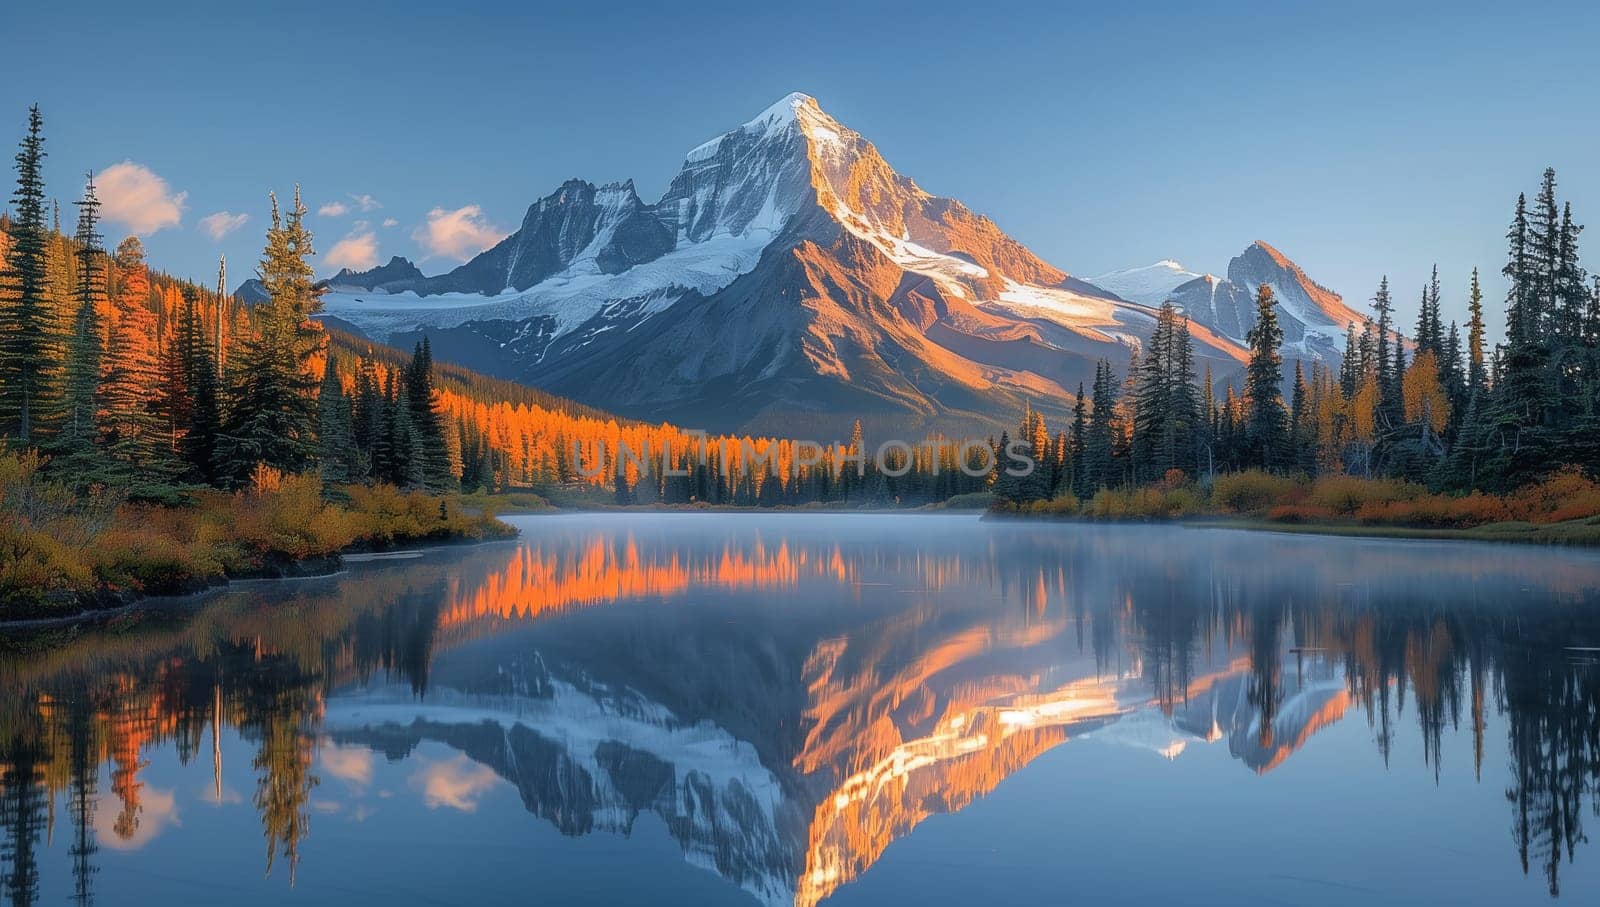 Mountain reflected in a lake, surrounded by trees, in a natural landscape by richwolf